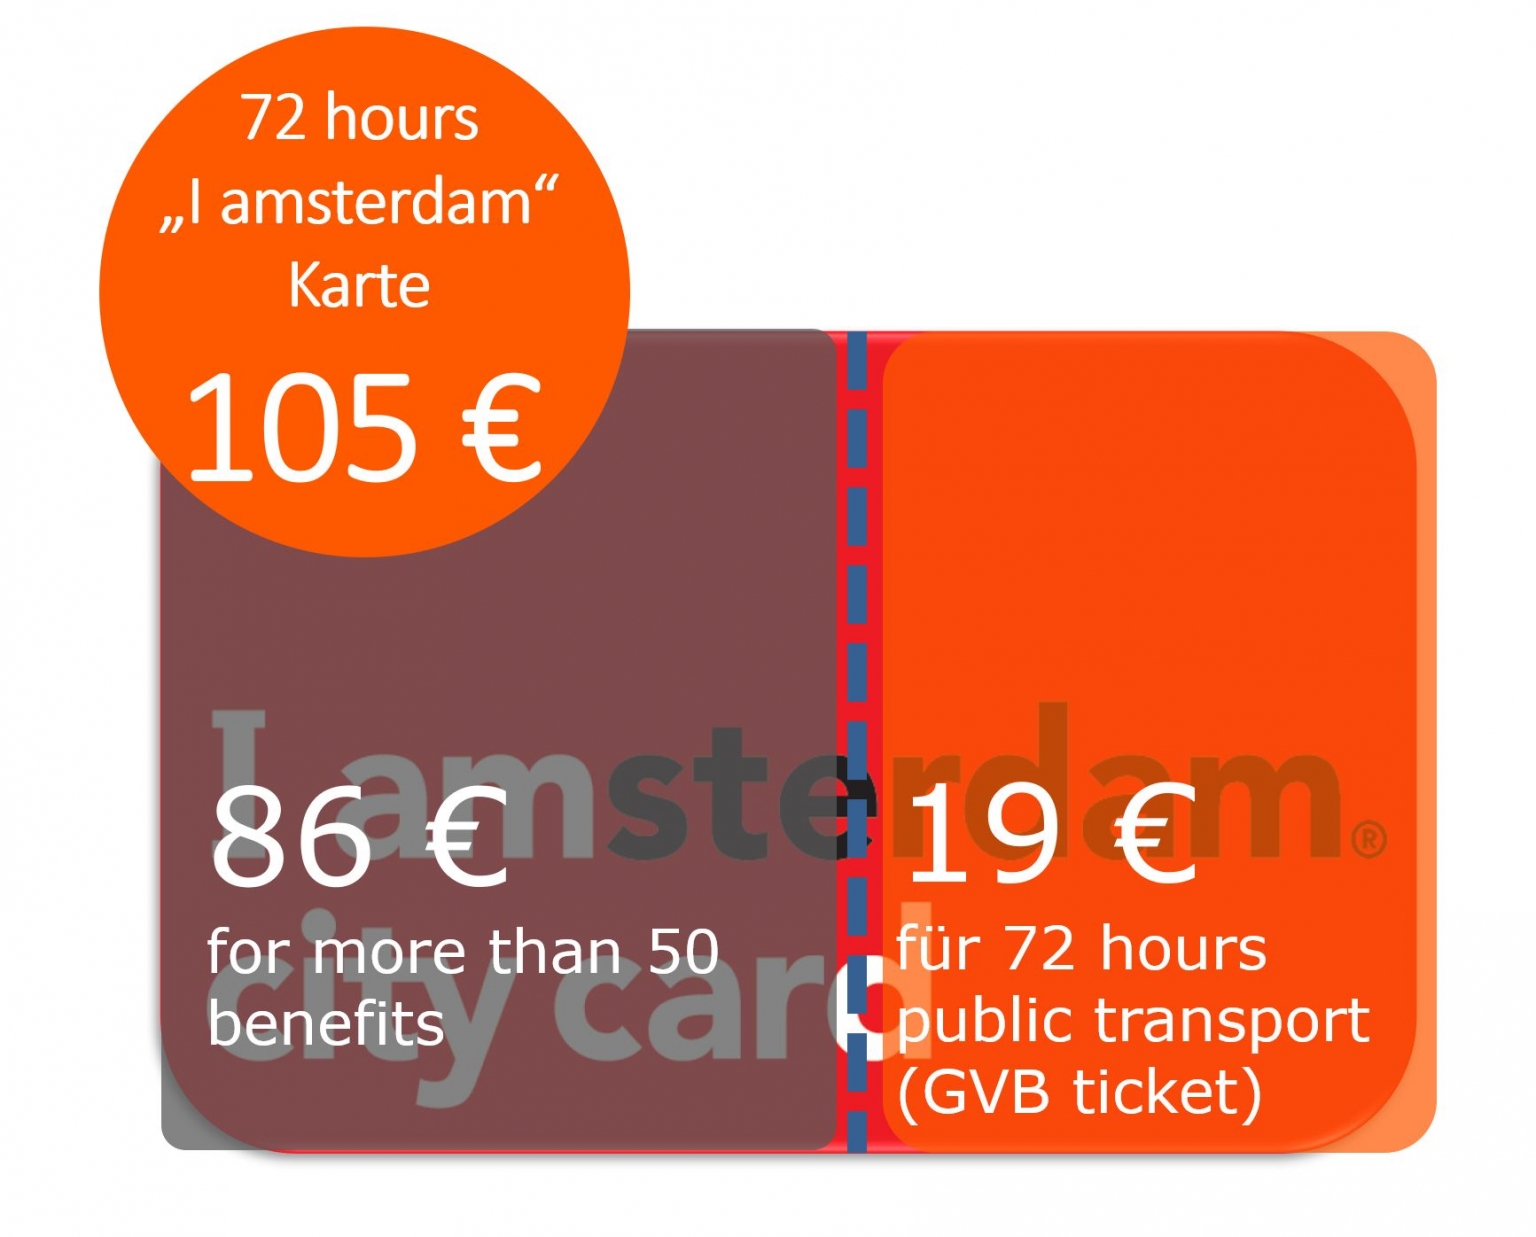 Testing the “I amsterdam” card is a purchase worth it? (2021)